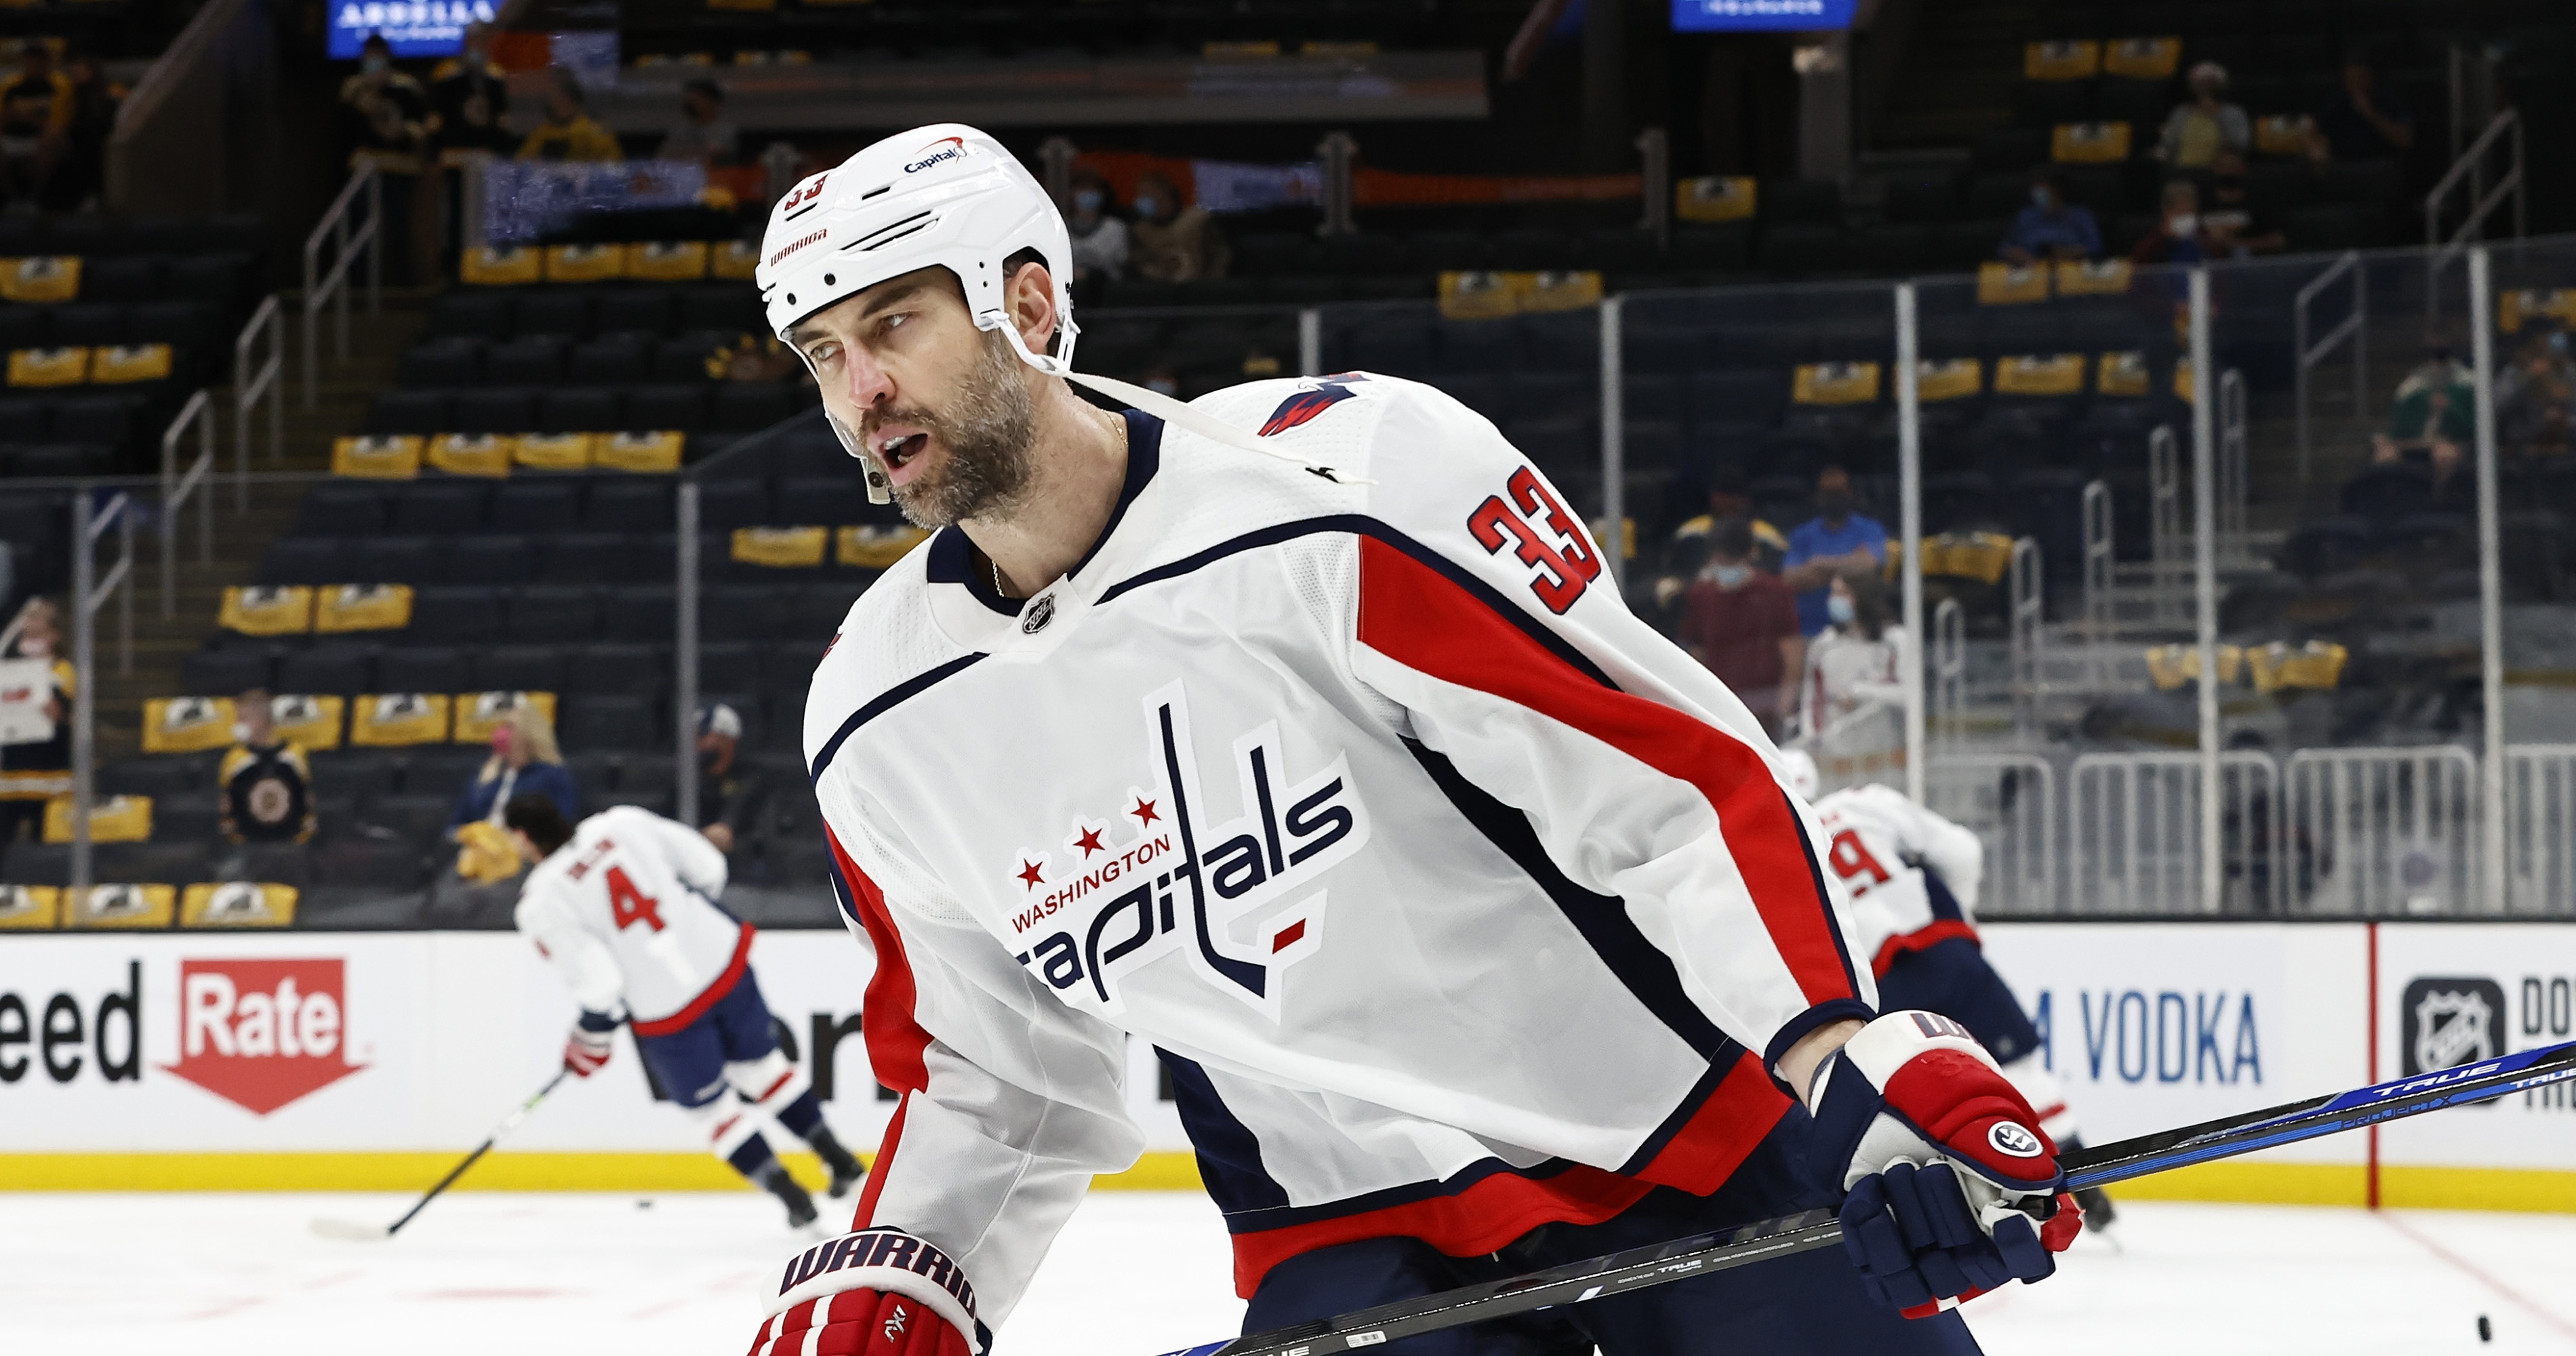 A first look at Zdeno Chara in a Capitals jersey